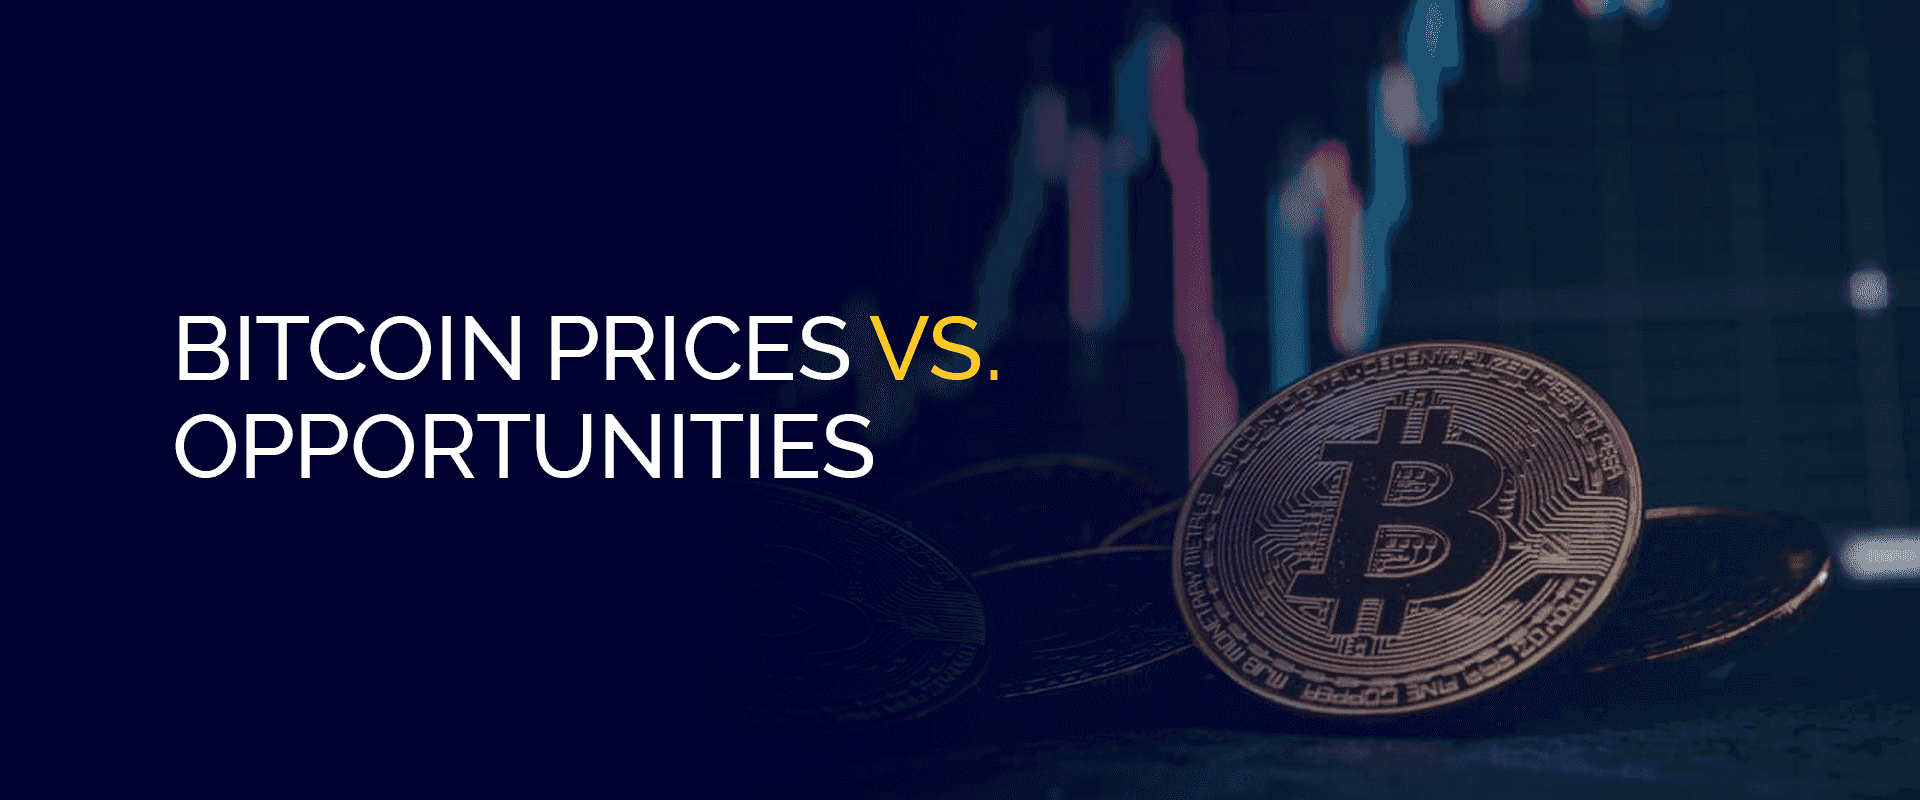 Bitcoin Prices vs. Opportunities